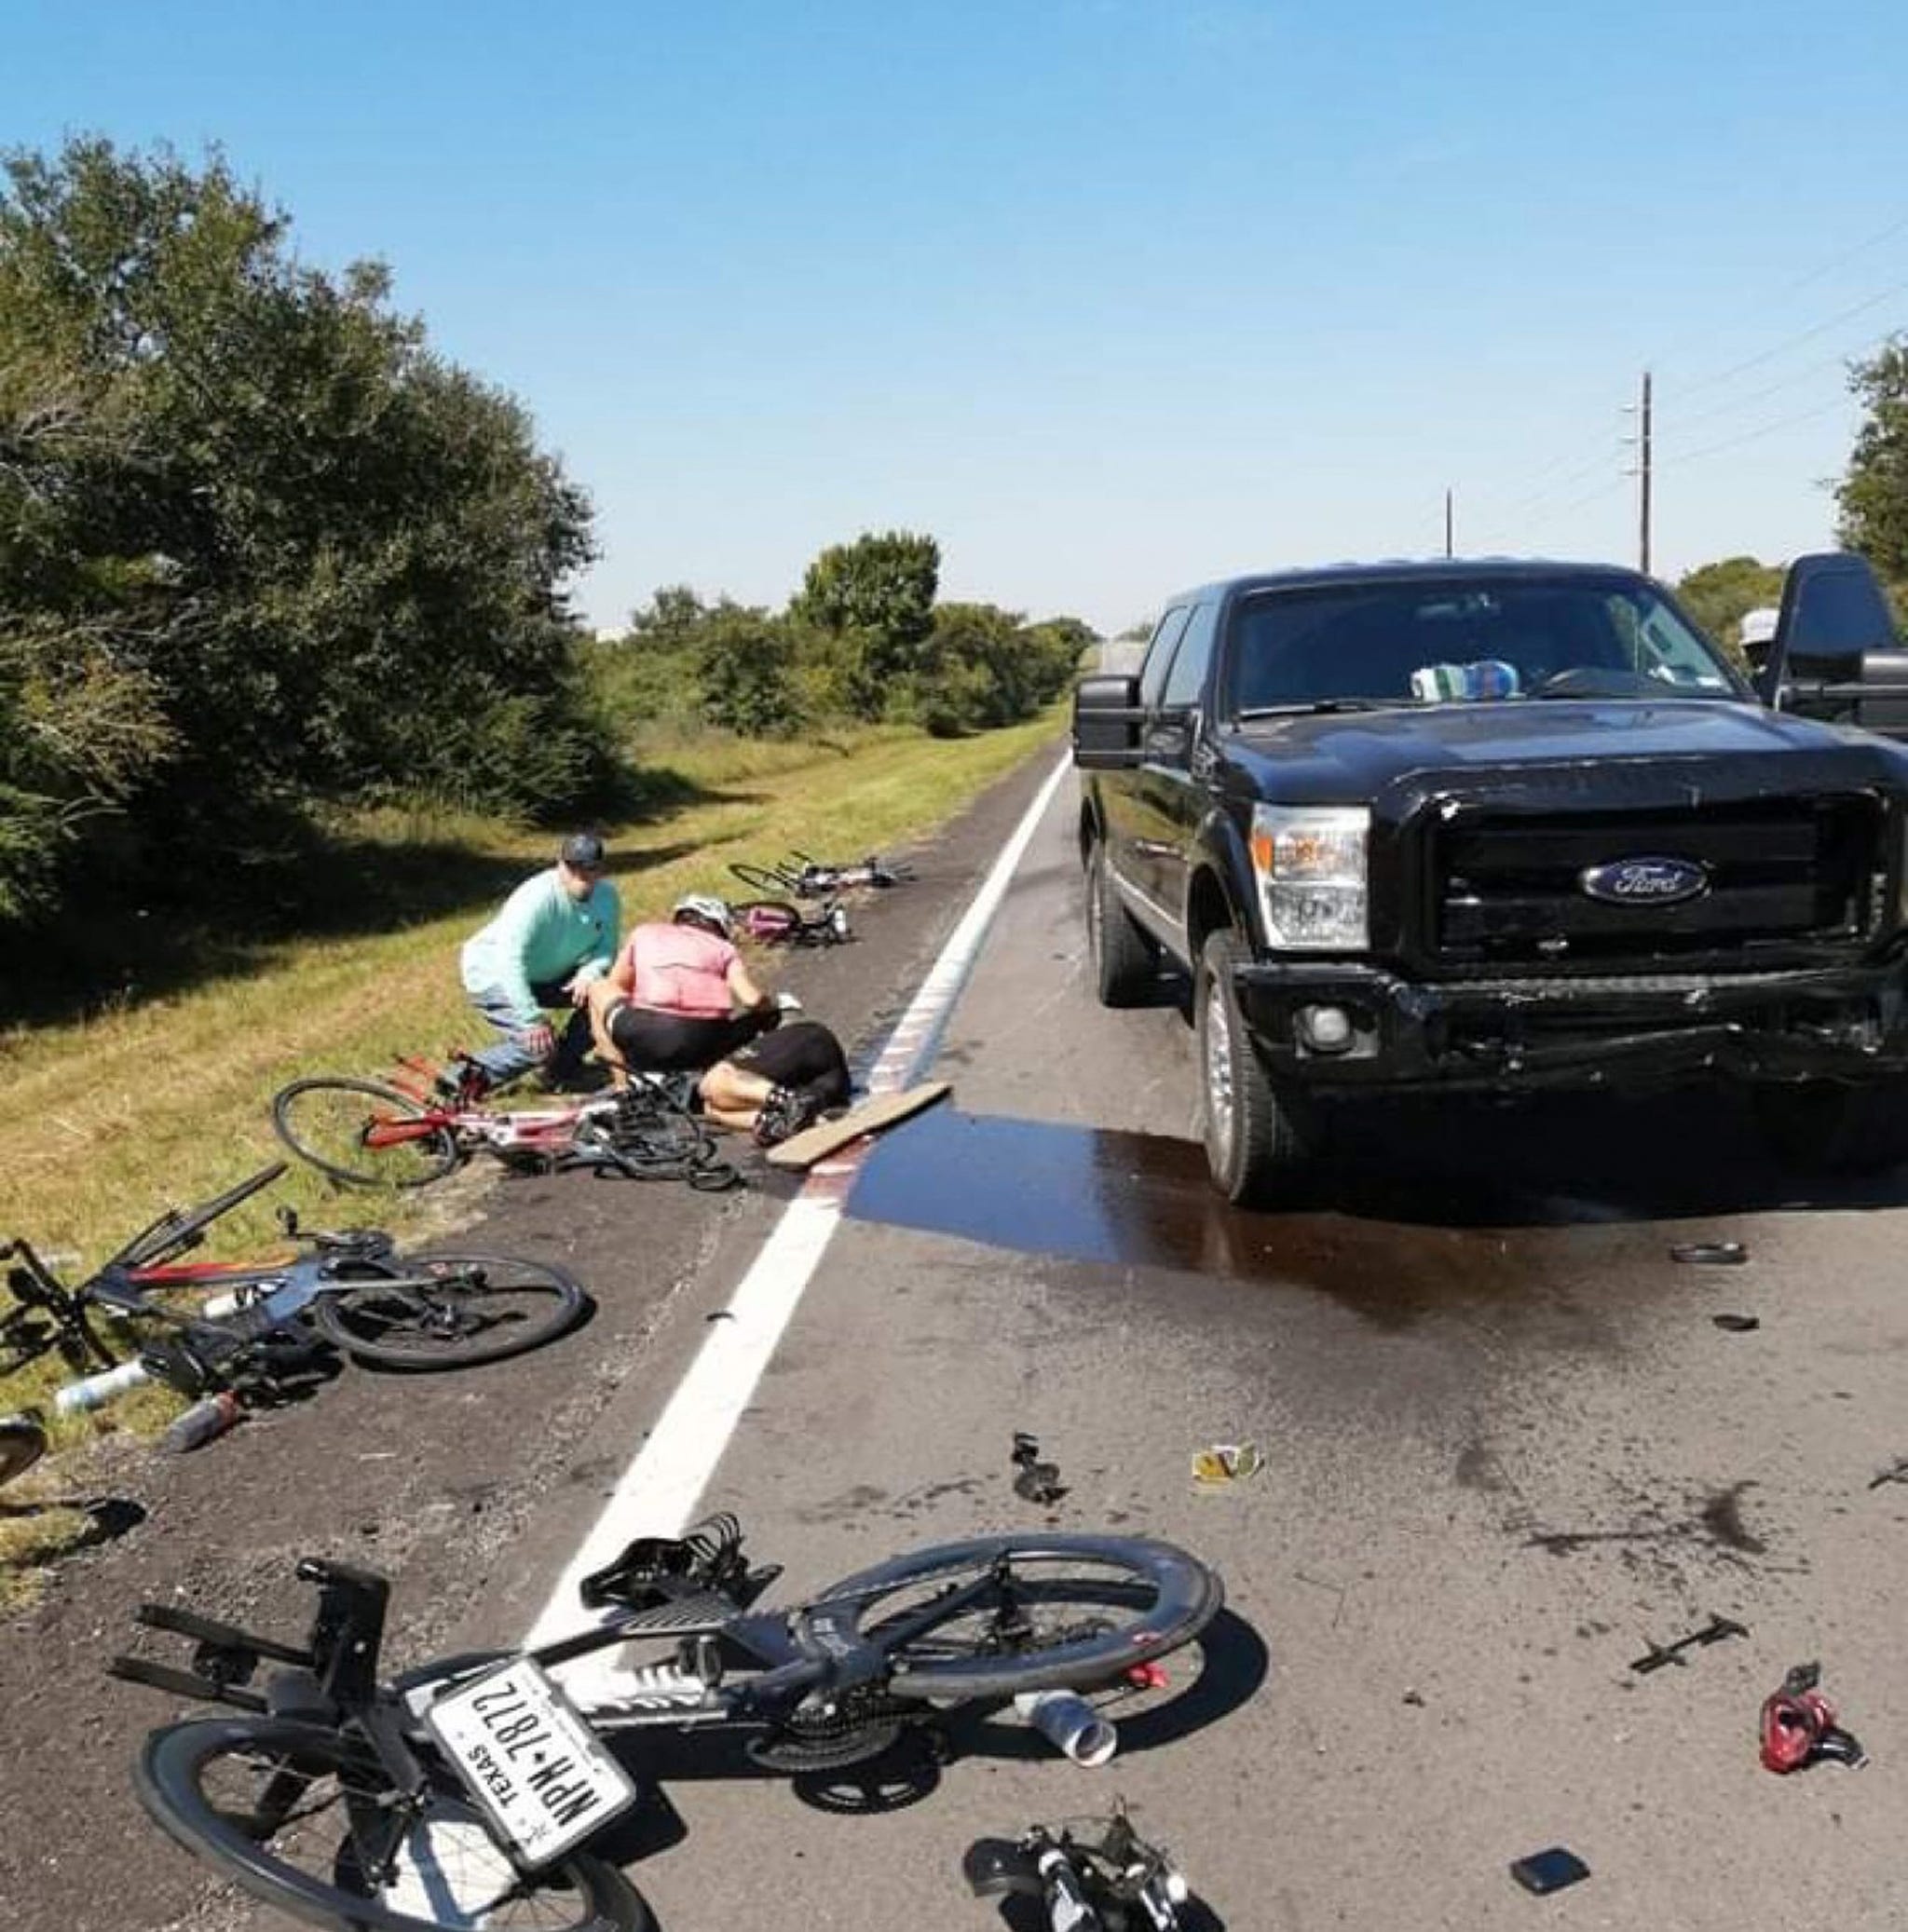 several bikes lay broken on the ground in front of a large pickup truck